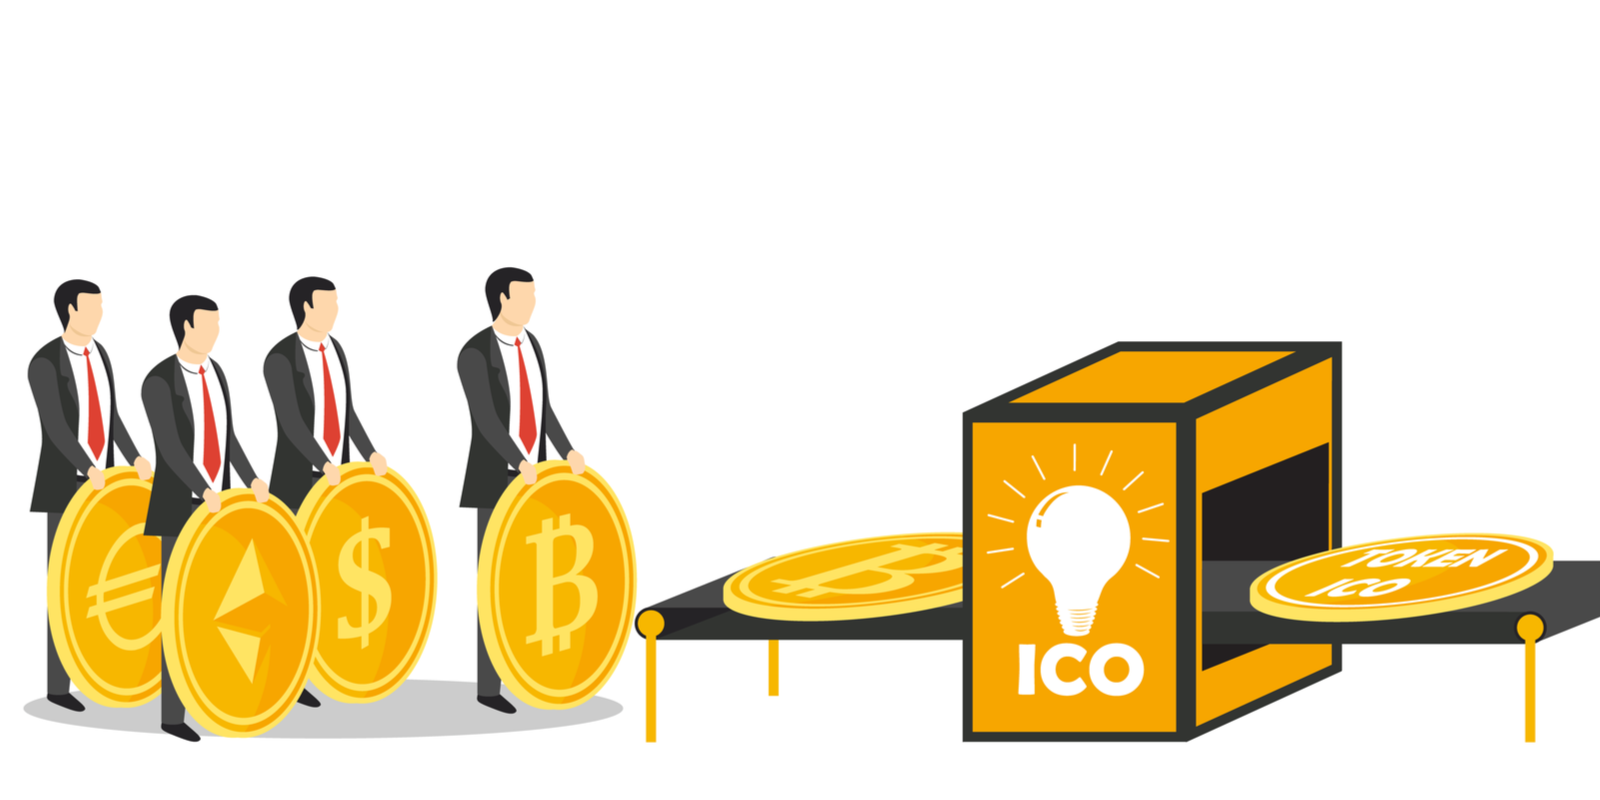 PWC Report Finds STOs 'Are Not Fundamentally Different From ICOs'